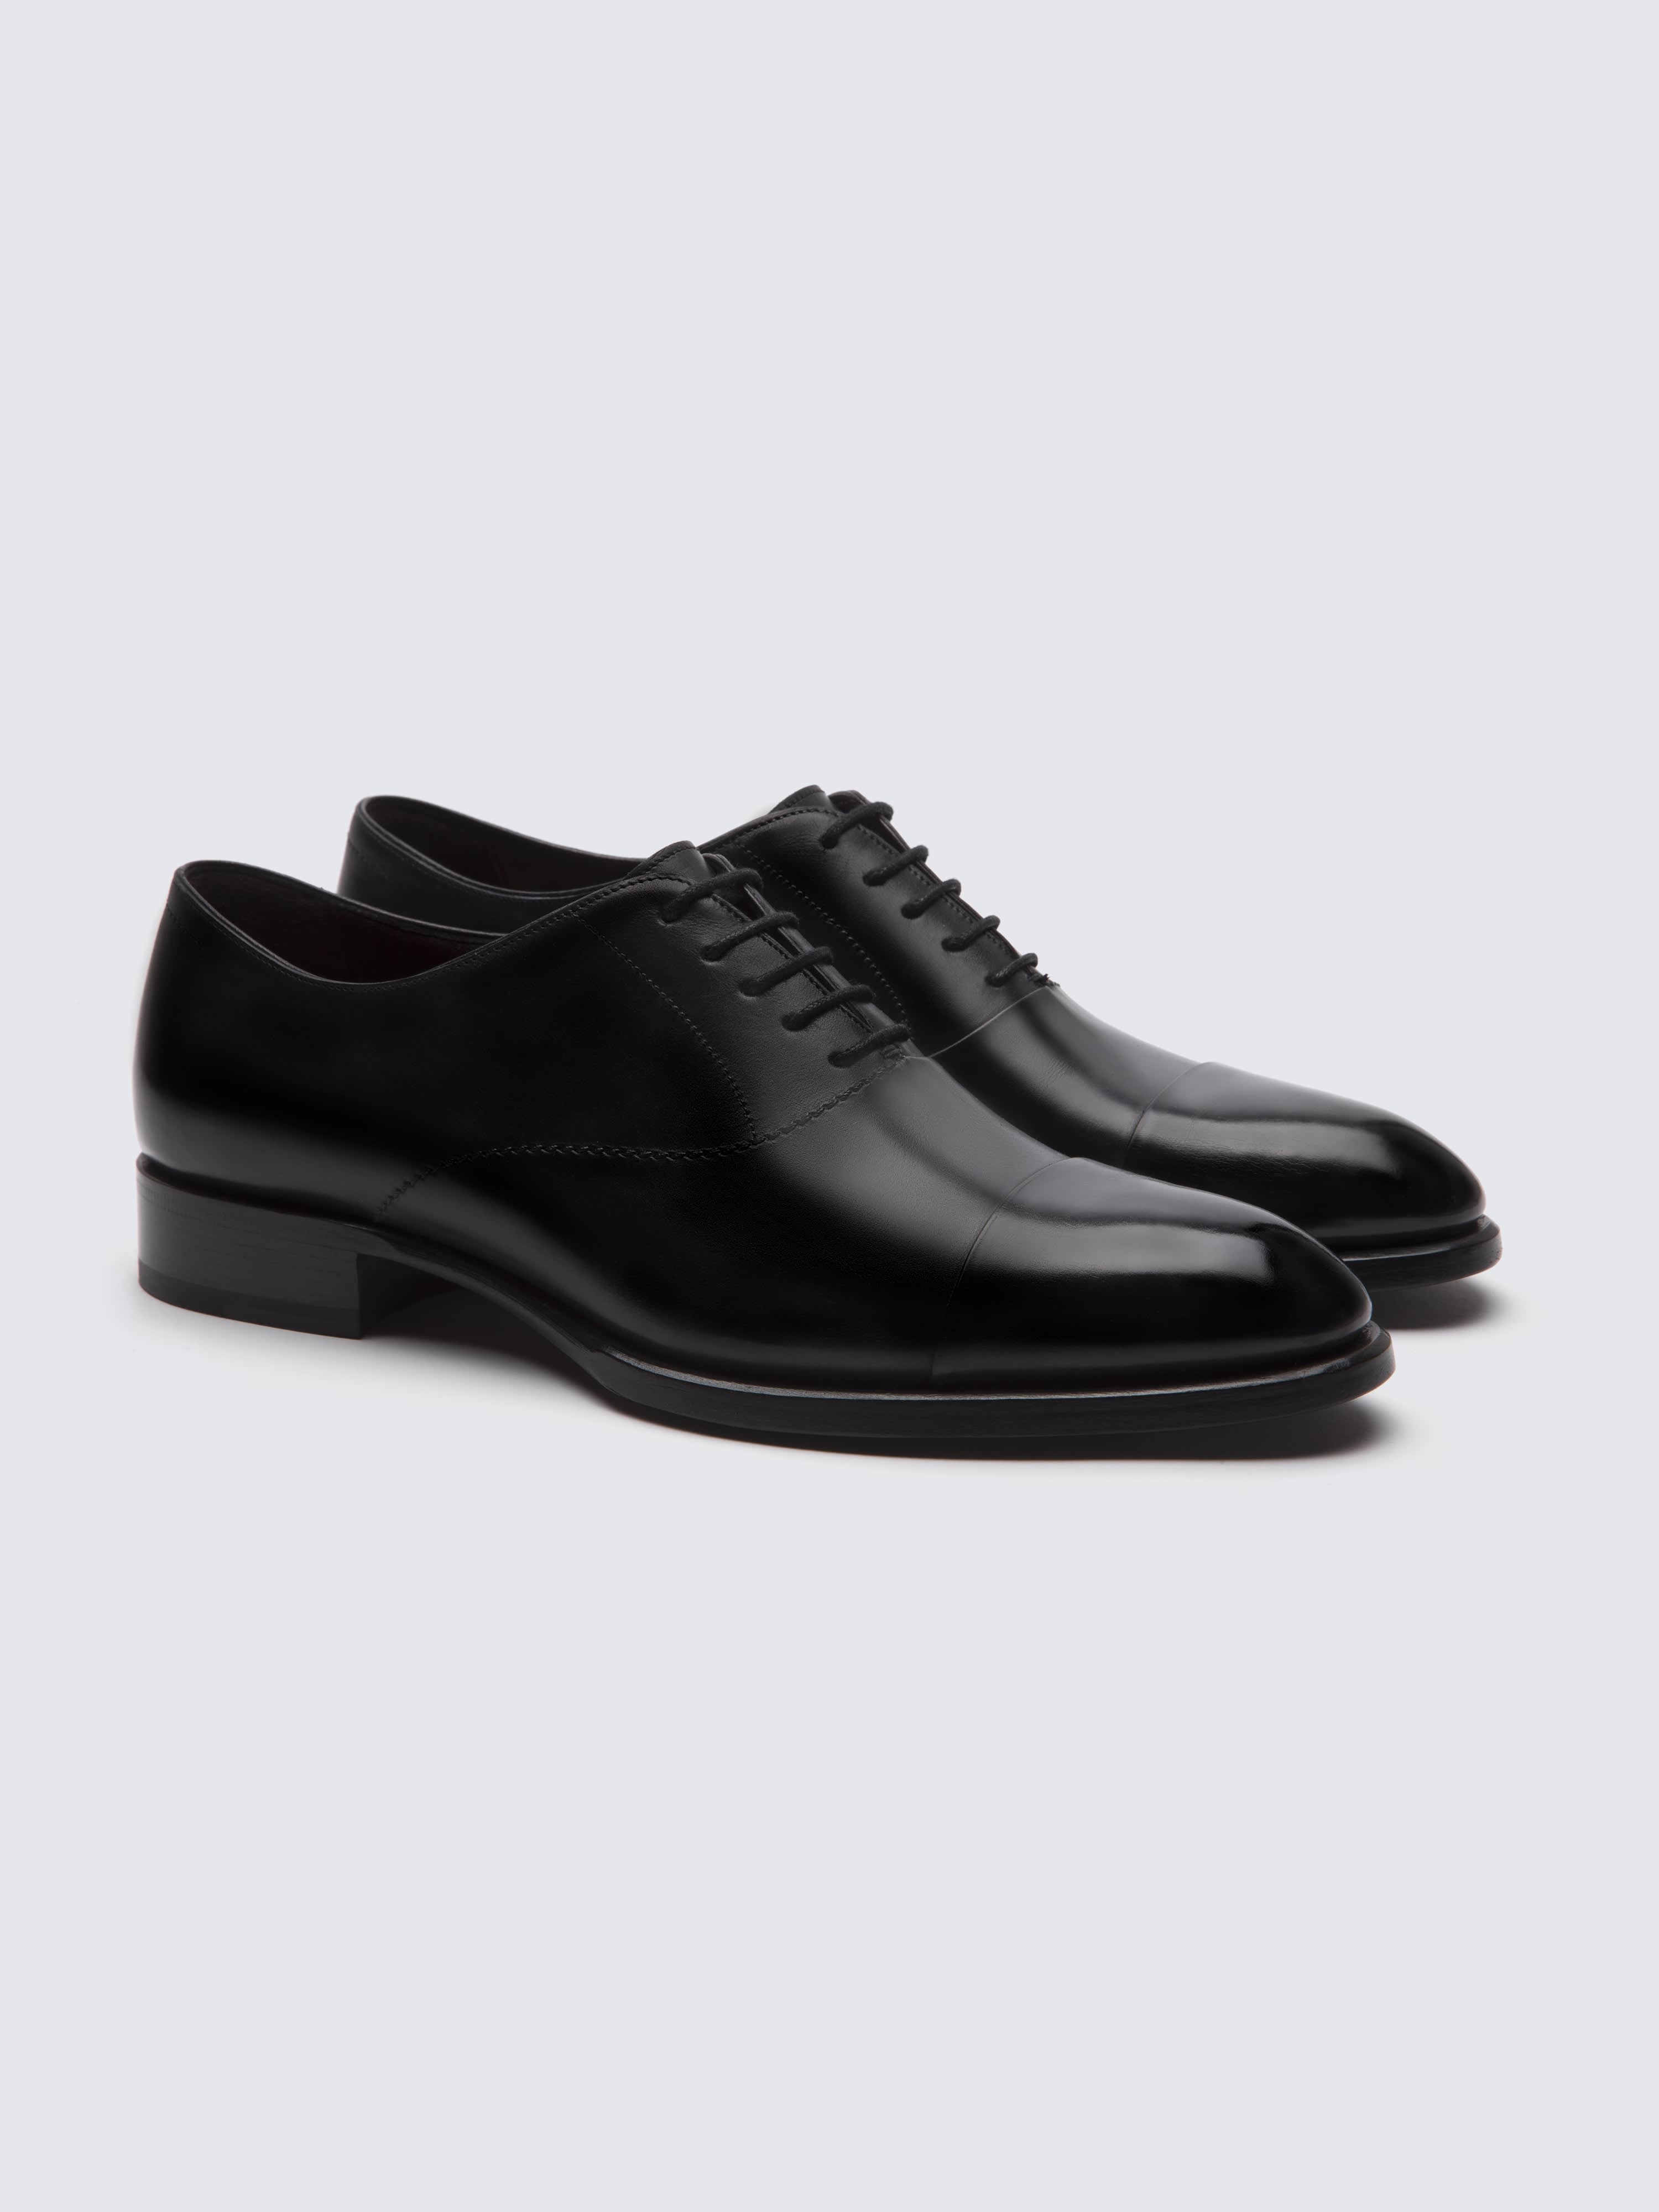 Black Cap Toe Oxford Shoes | Brioni® In Official Store